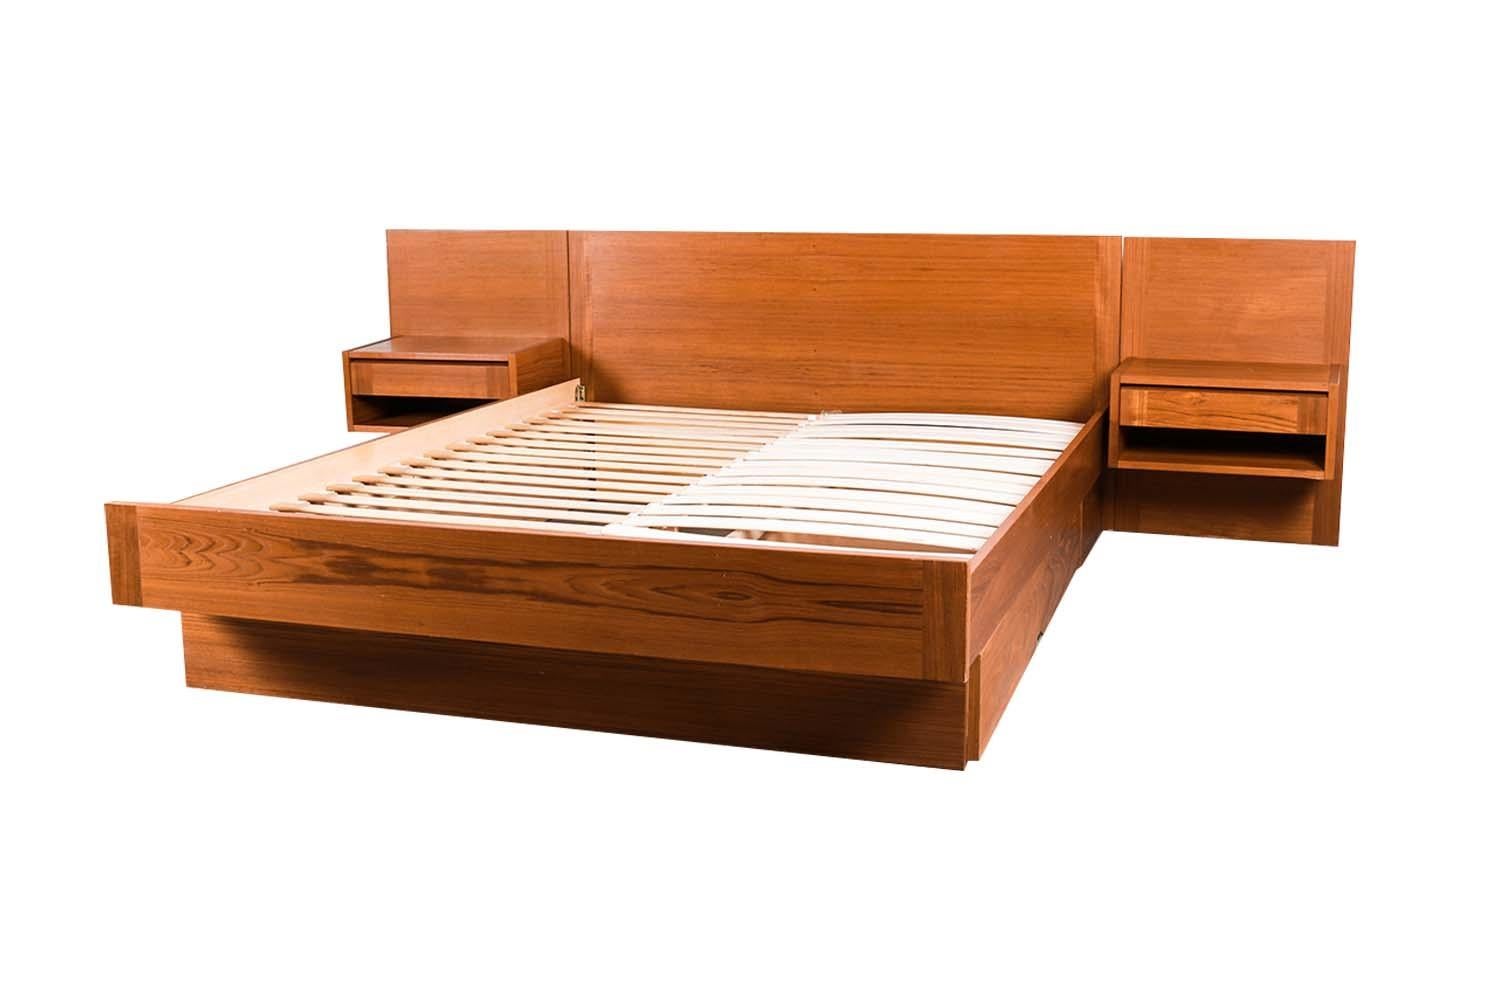 A remarkable Danish teak, mid-century queen floating platform bed with floating nightstands and a storage drawer, made in Denmark. Exceptional construction and style. Featuring a stunning headboard with hanging, floating, nightstands, both with a